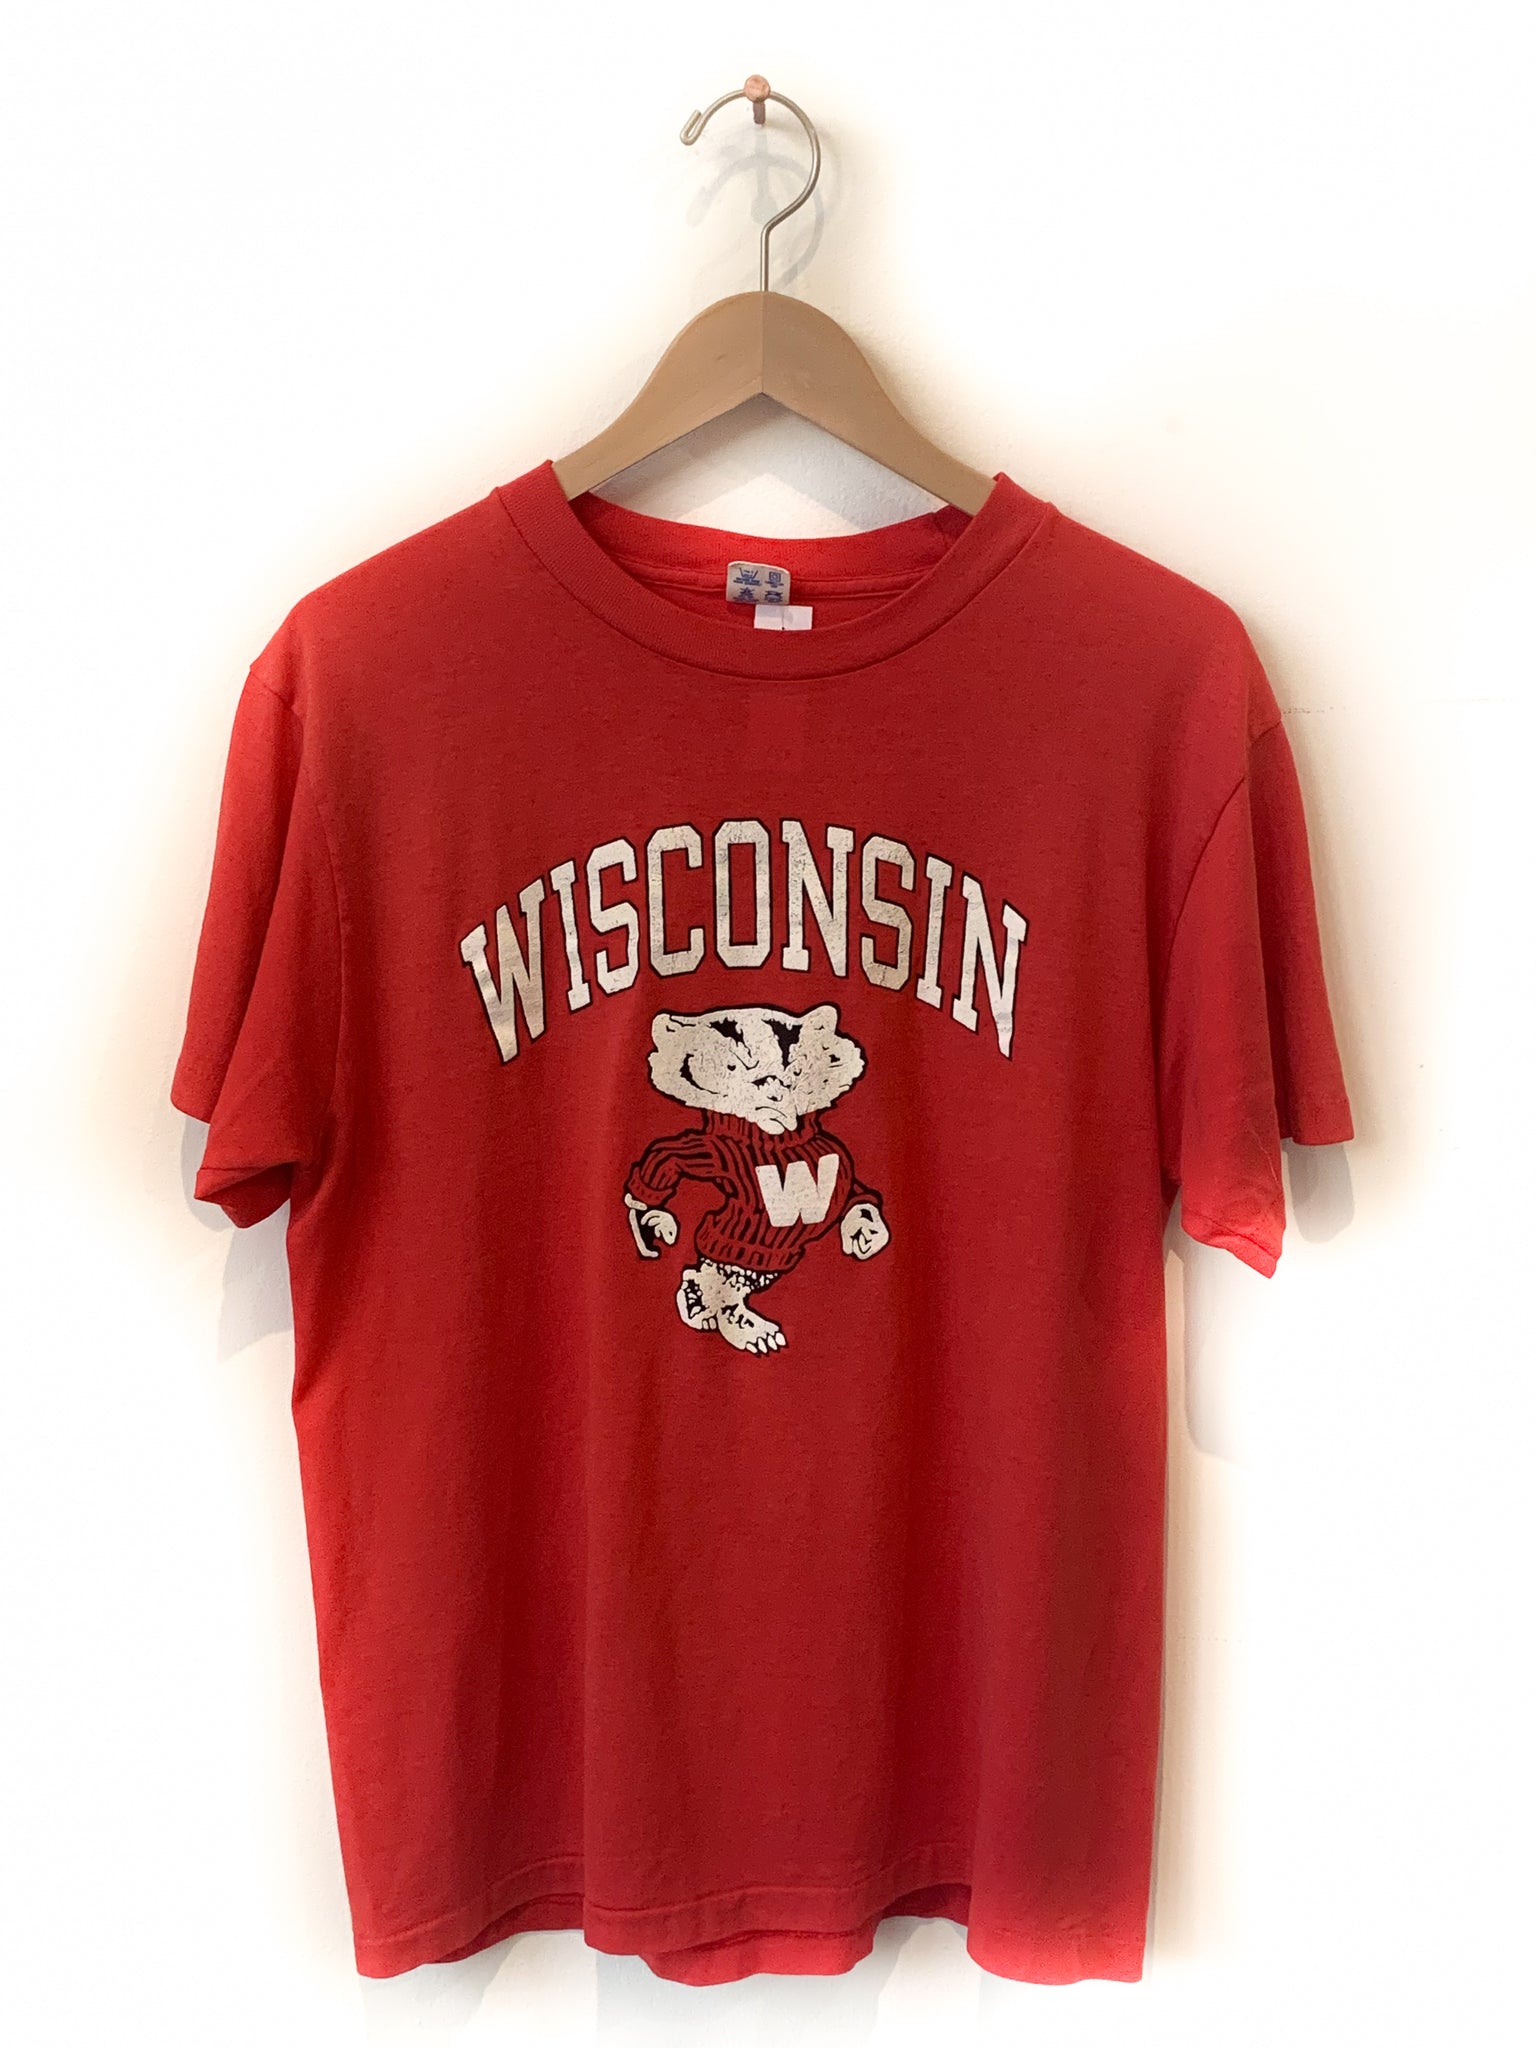 WISCONSIN CHAMPION RED TEE